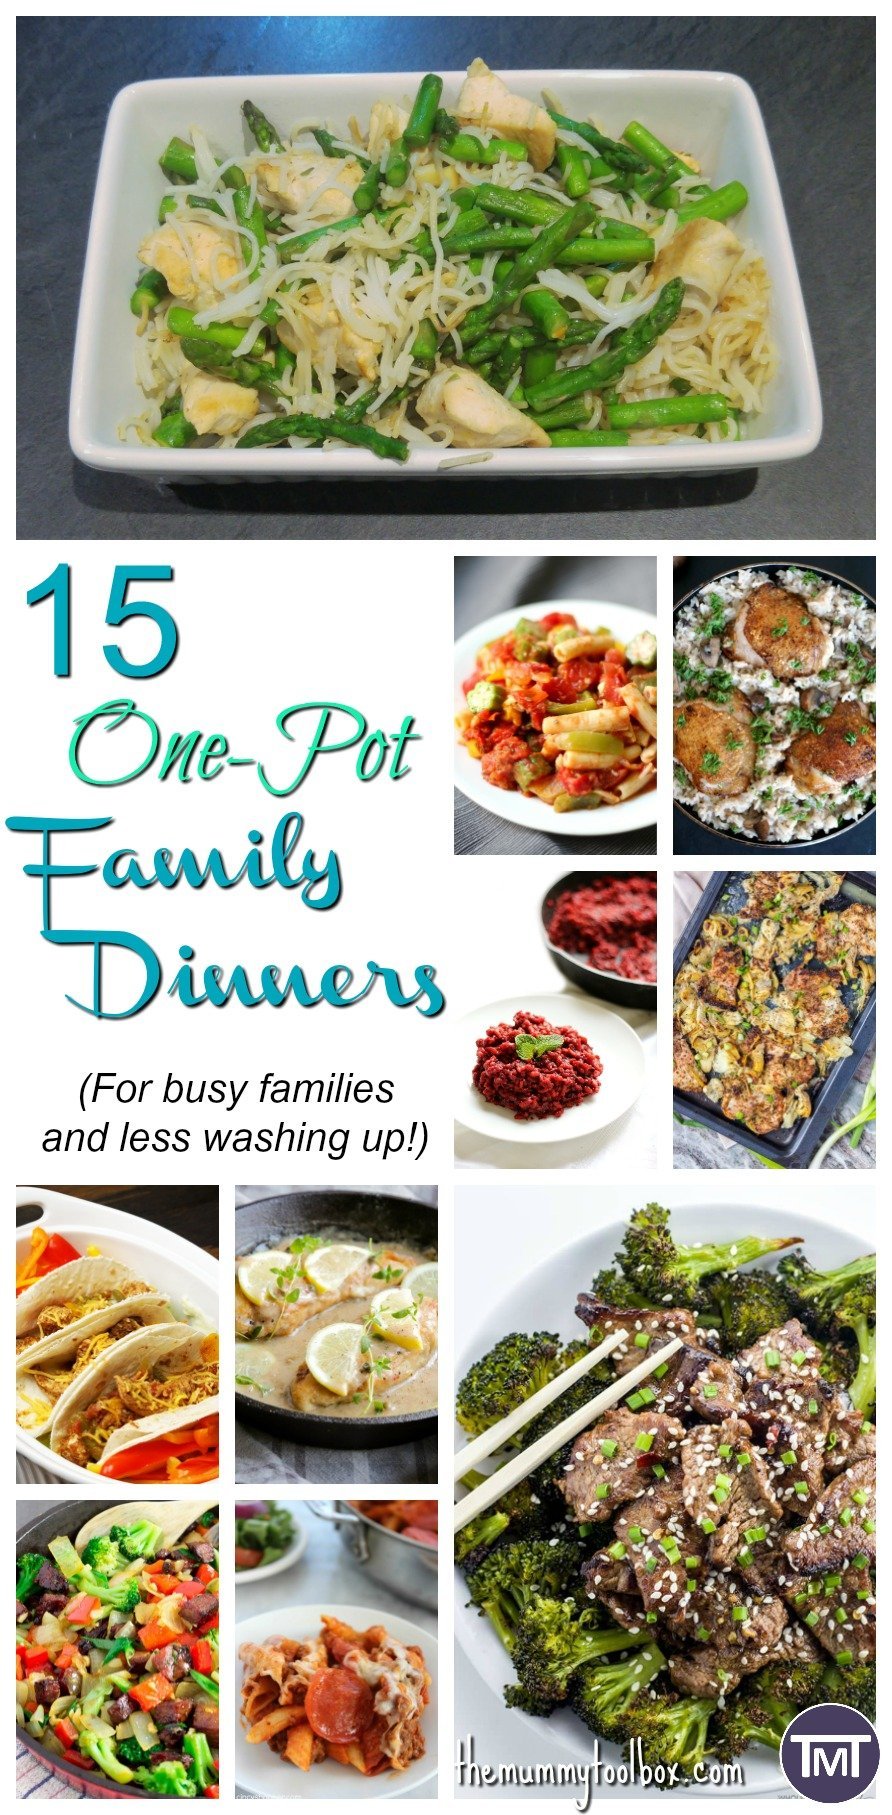 We have a bigger family now with less time to spend on cooking (and washing up) so here are 15 delicious family orientated one pot dinners to save time.